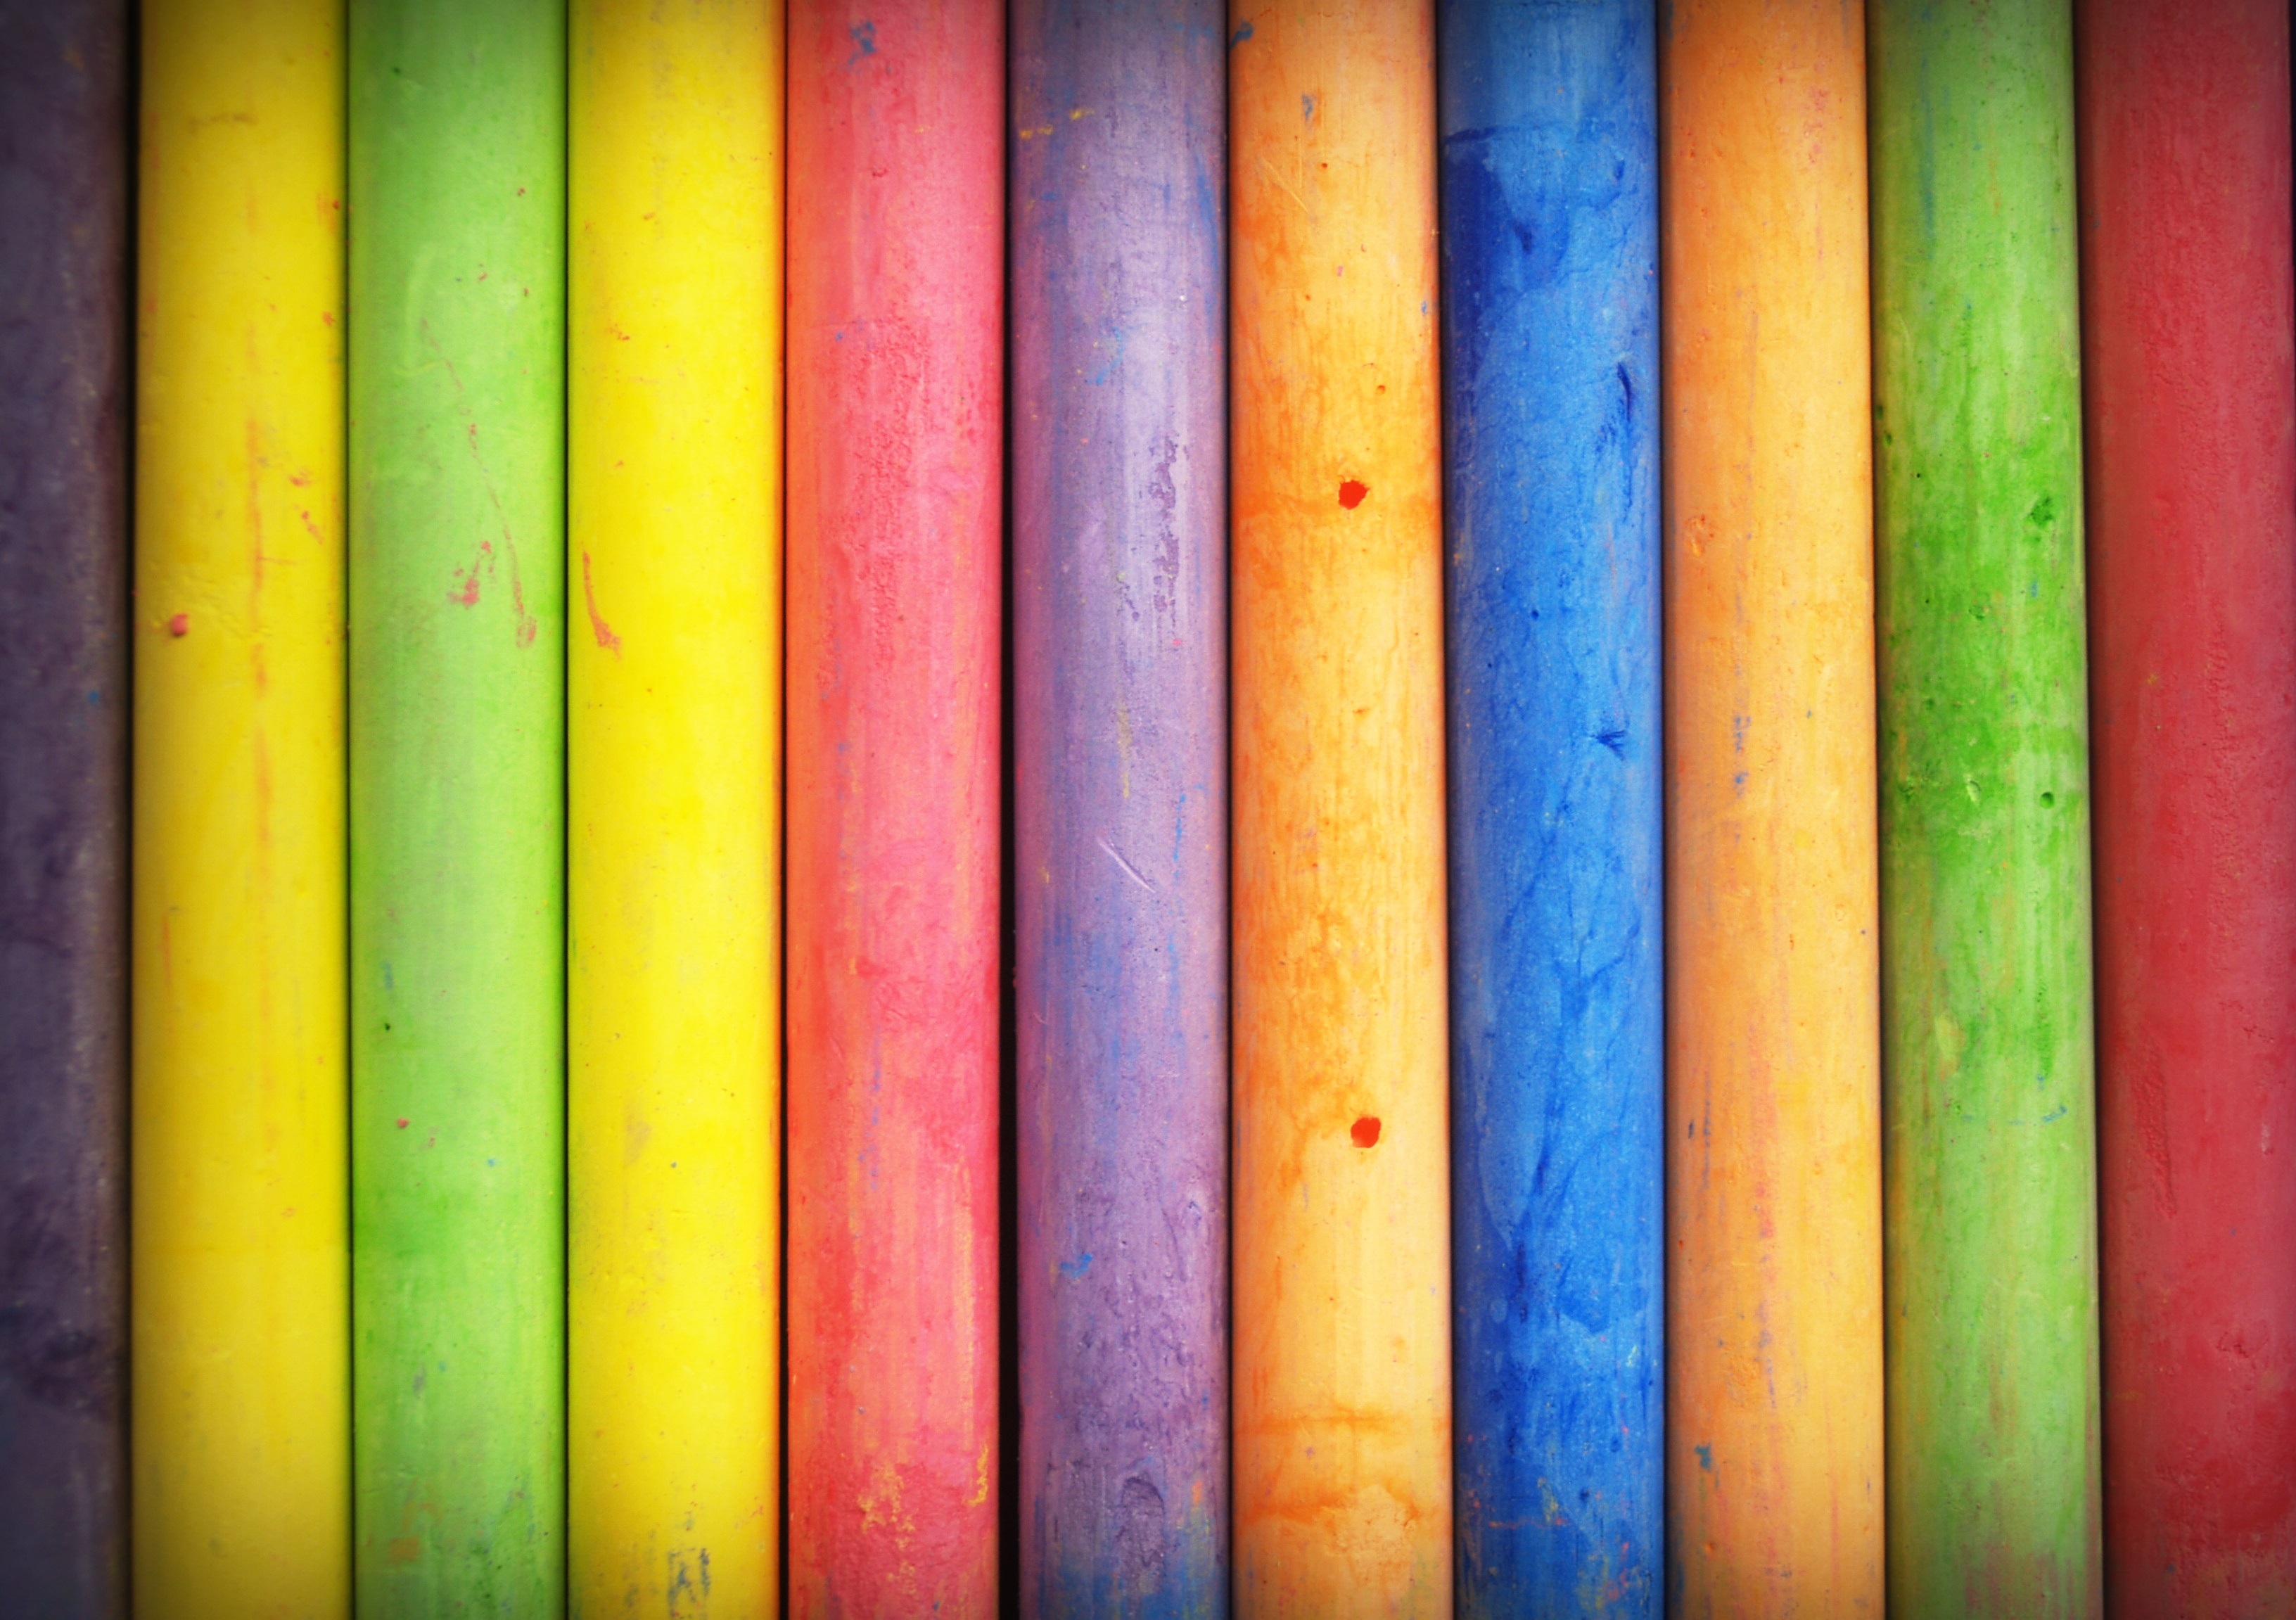 A row of colorful chalk.